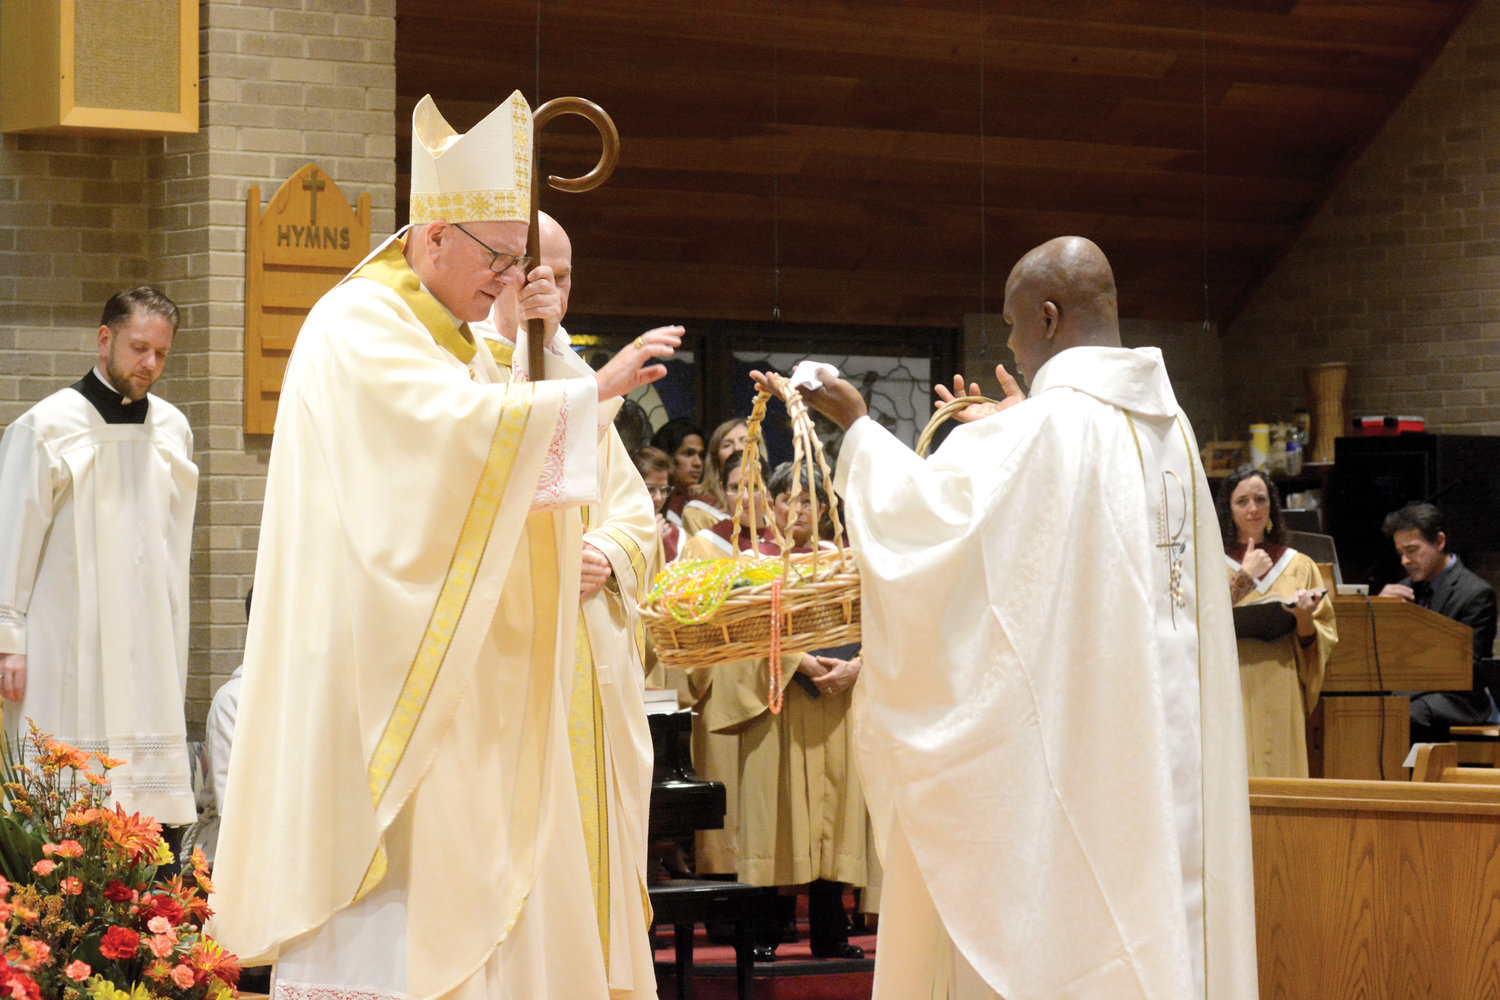 Cardinal Dolan blesses rosaries held by Father Abraham Berko, pastor, at Mass to celebrate the 125th anniversary of Holy Name of Jesus parish in Valhalla Nov. 20.